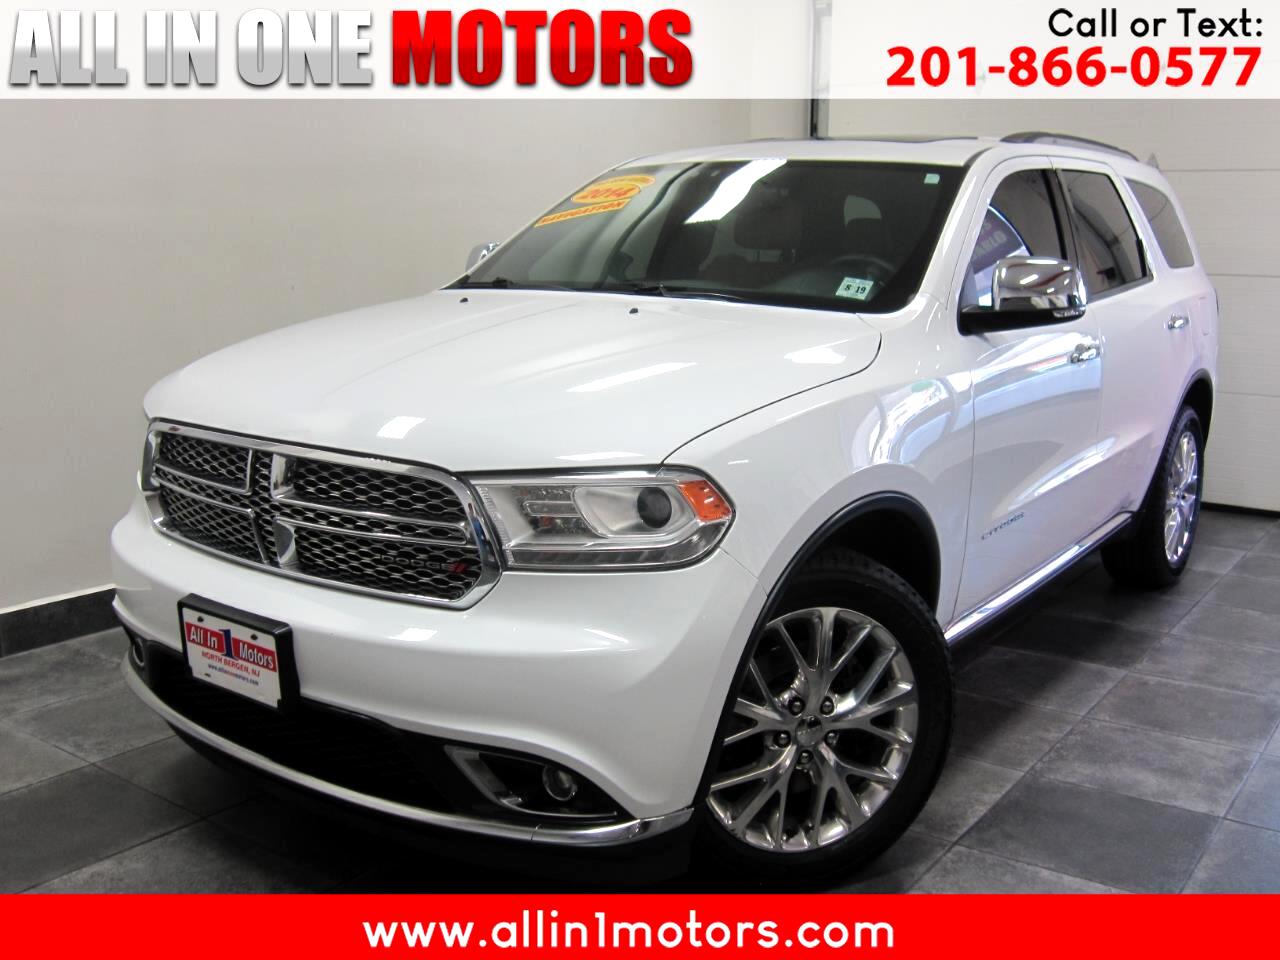 Used 2014 Dodge Durango Awd 4dr Citadel For Sale In North Bergen